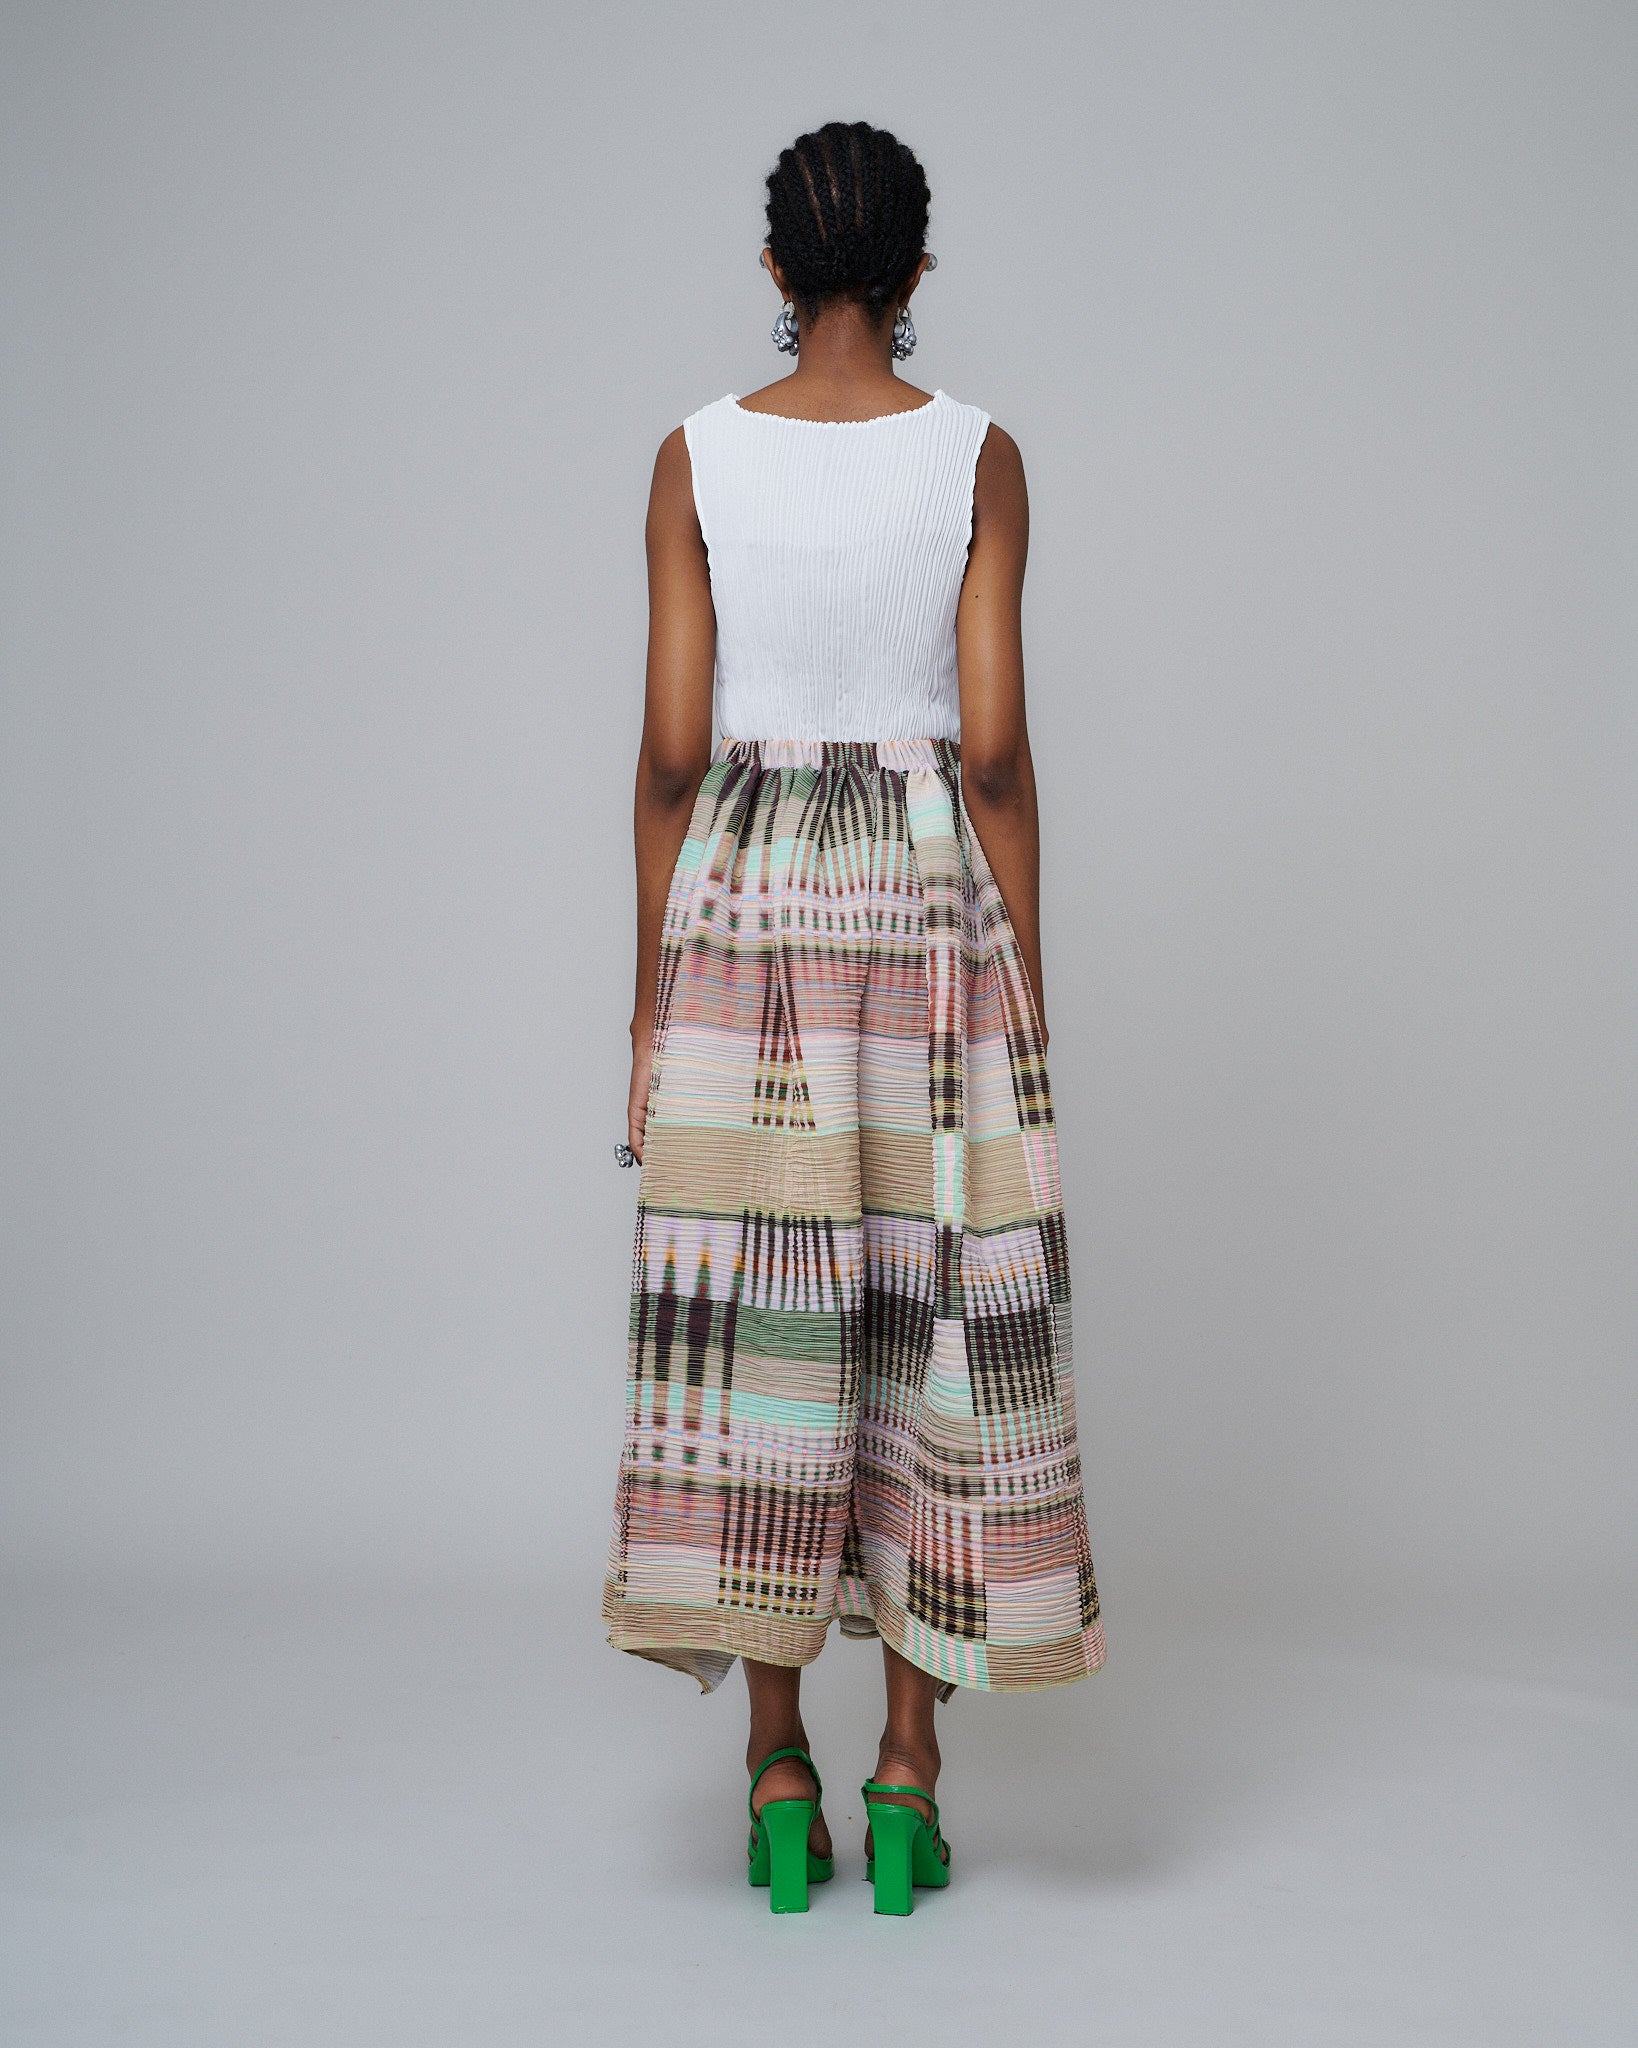 Gaia Skirt in Holm